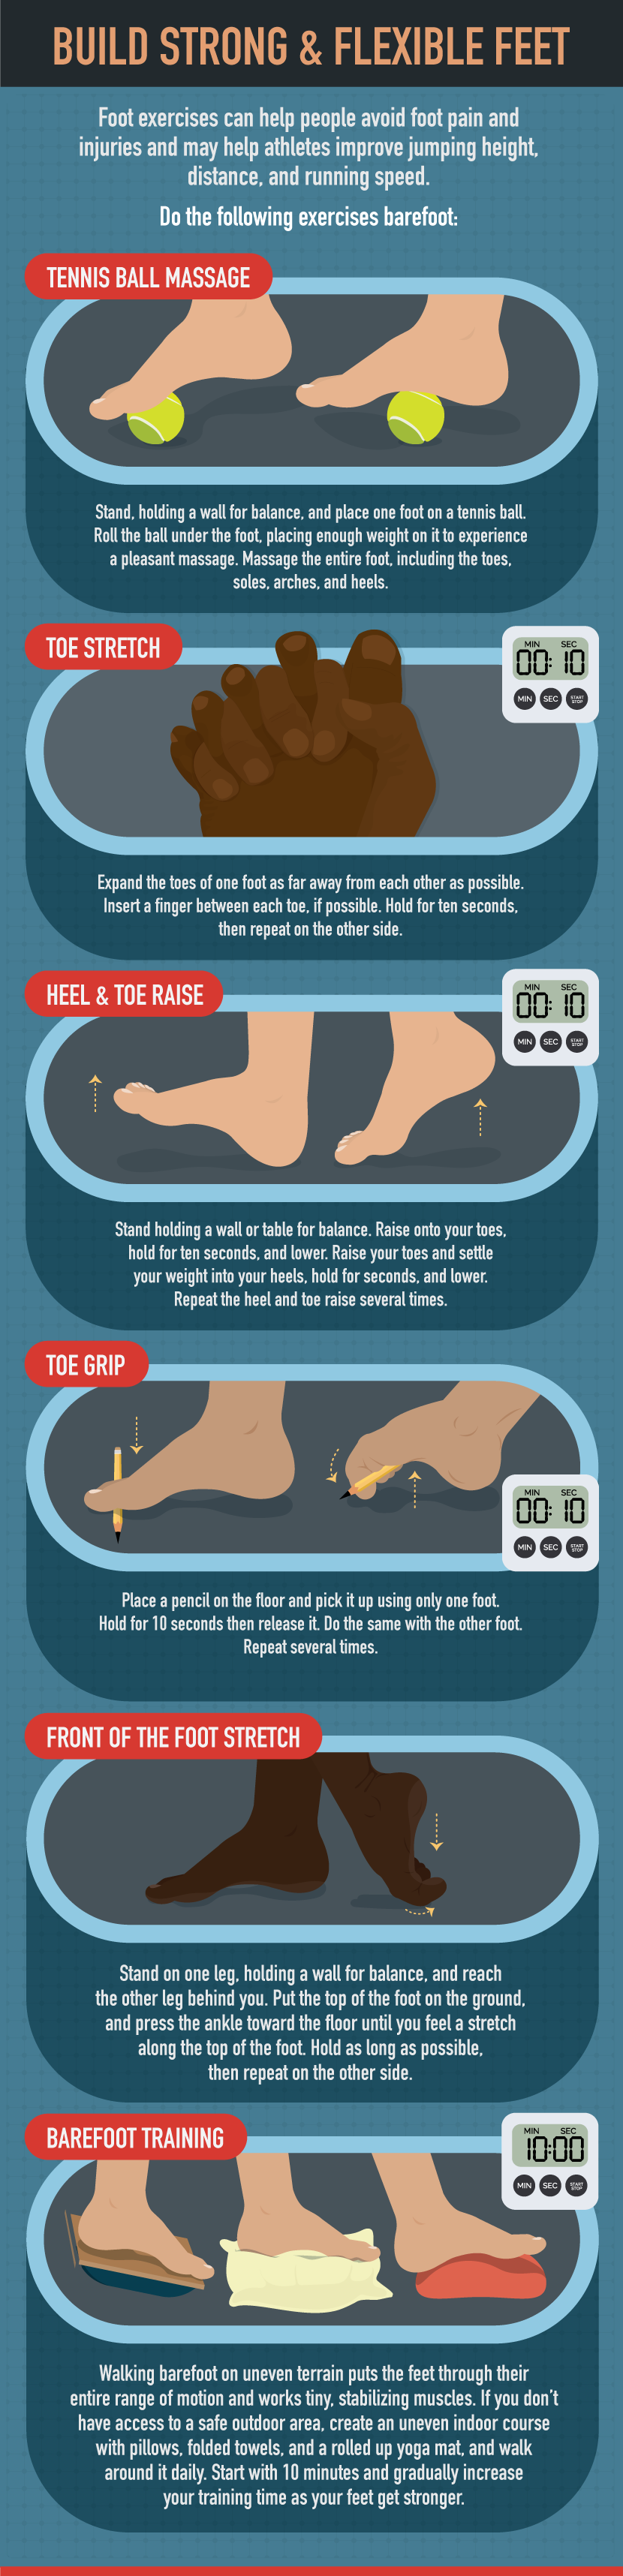 Build Strong Flexible Feet - How to Treat Your Feet